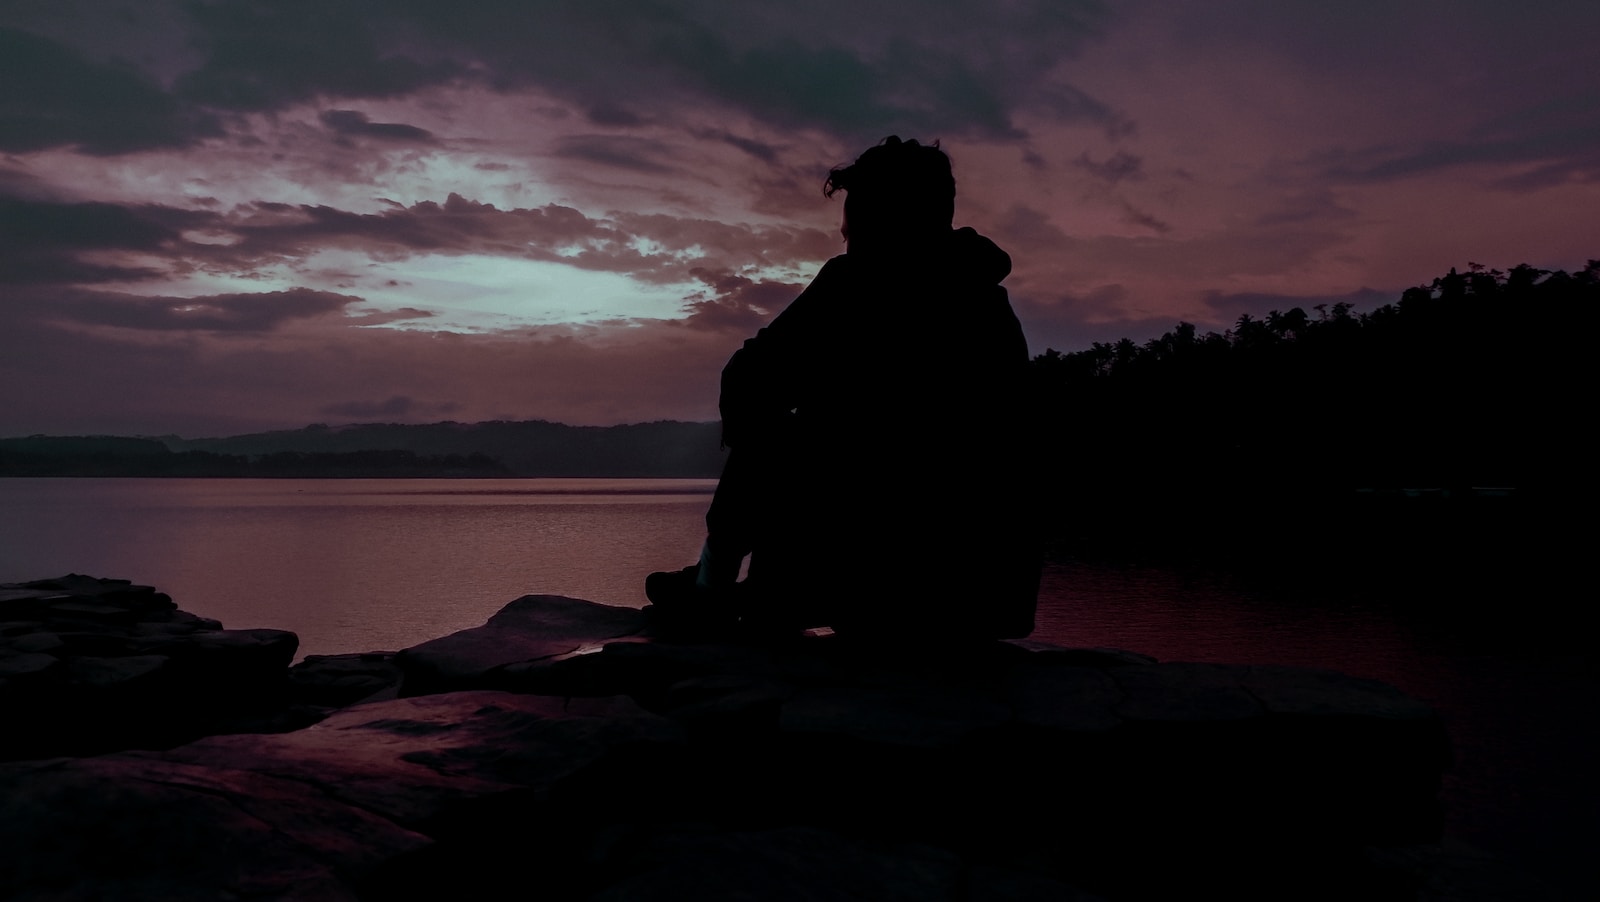 silhouette of man sitting on rock near body of water during sunset